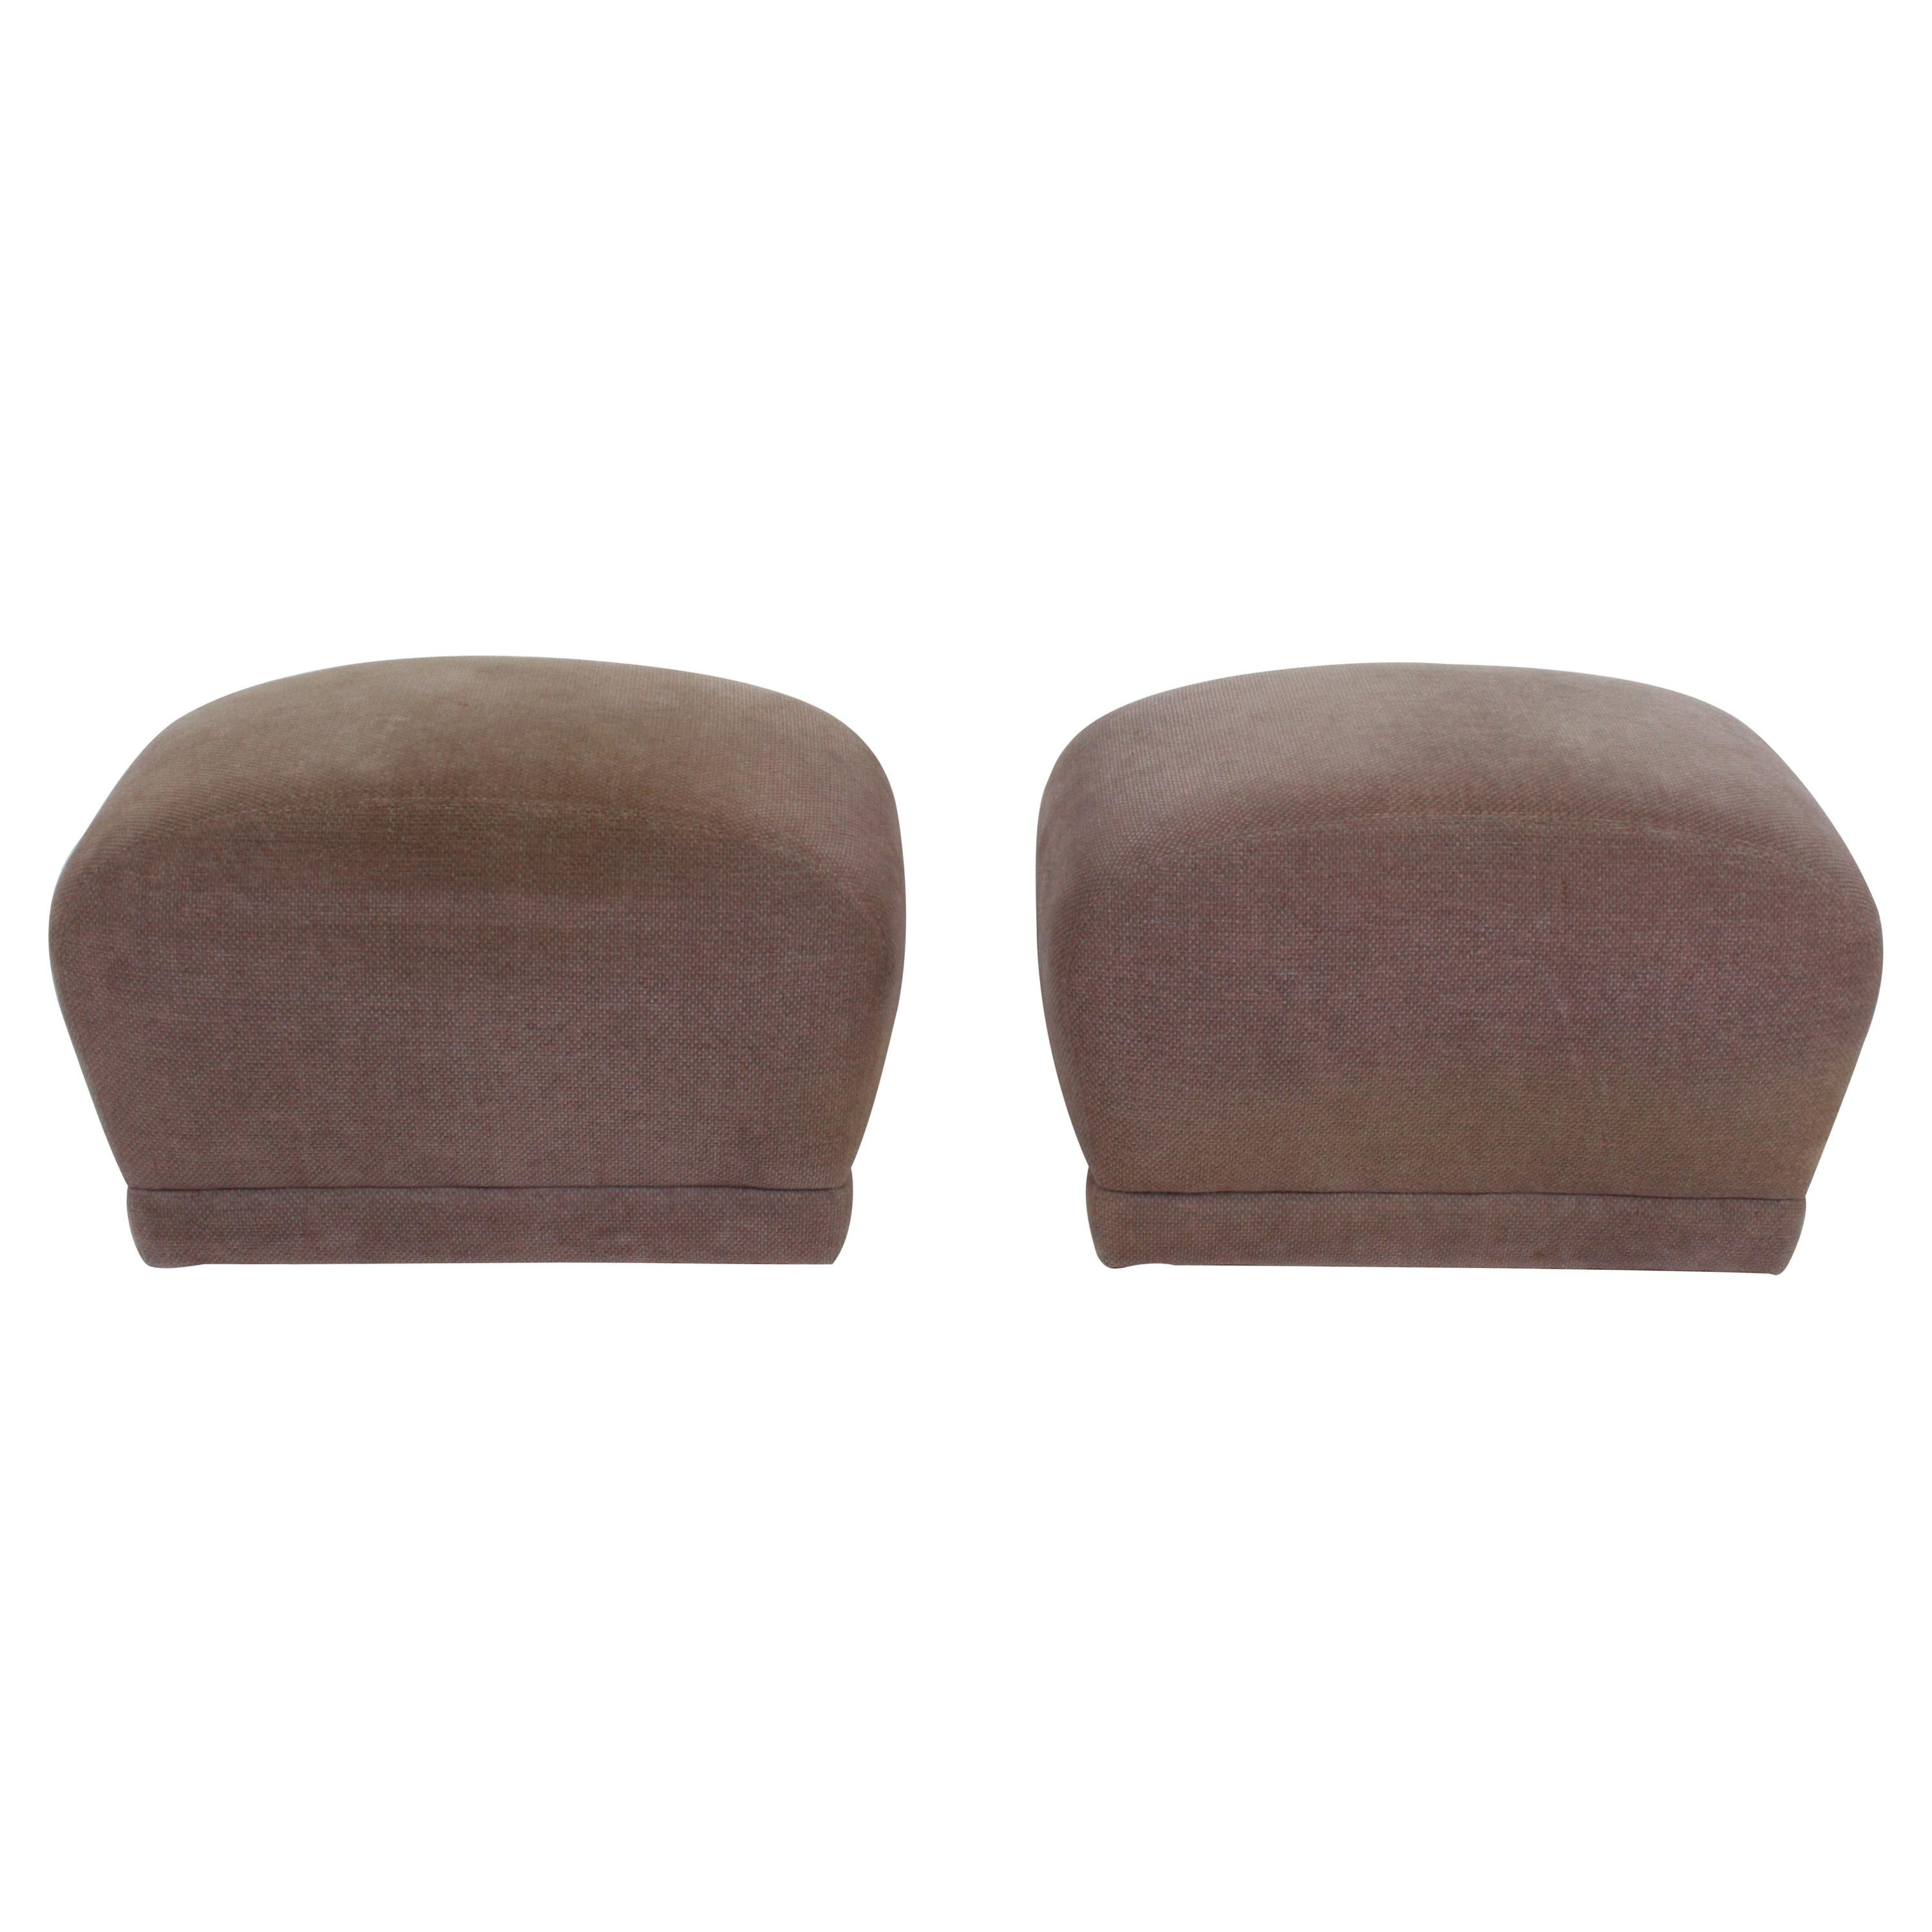 Pair of 1980's Upholstered Poufs or Ottomans on Castors, Style of Milo Baughman